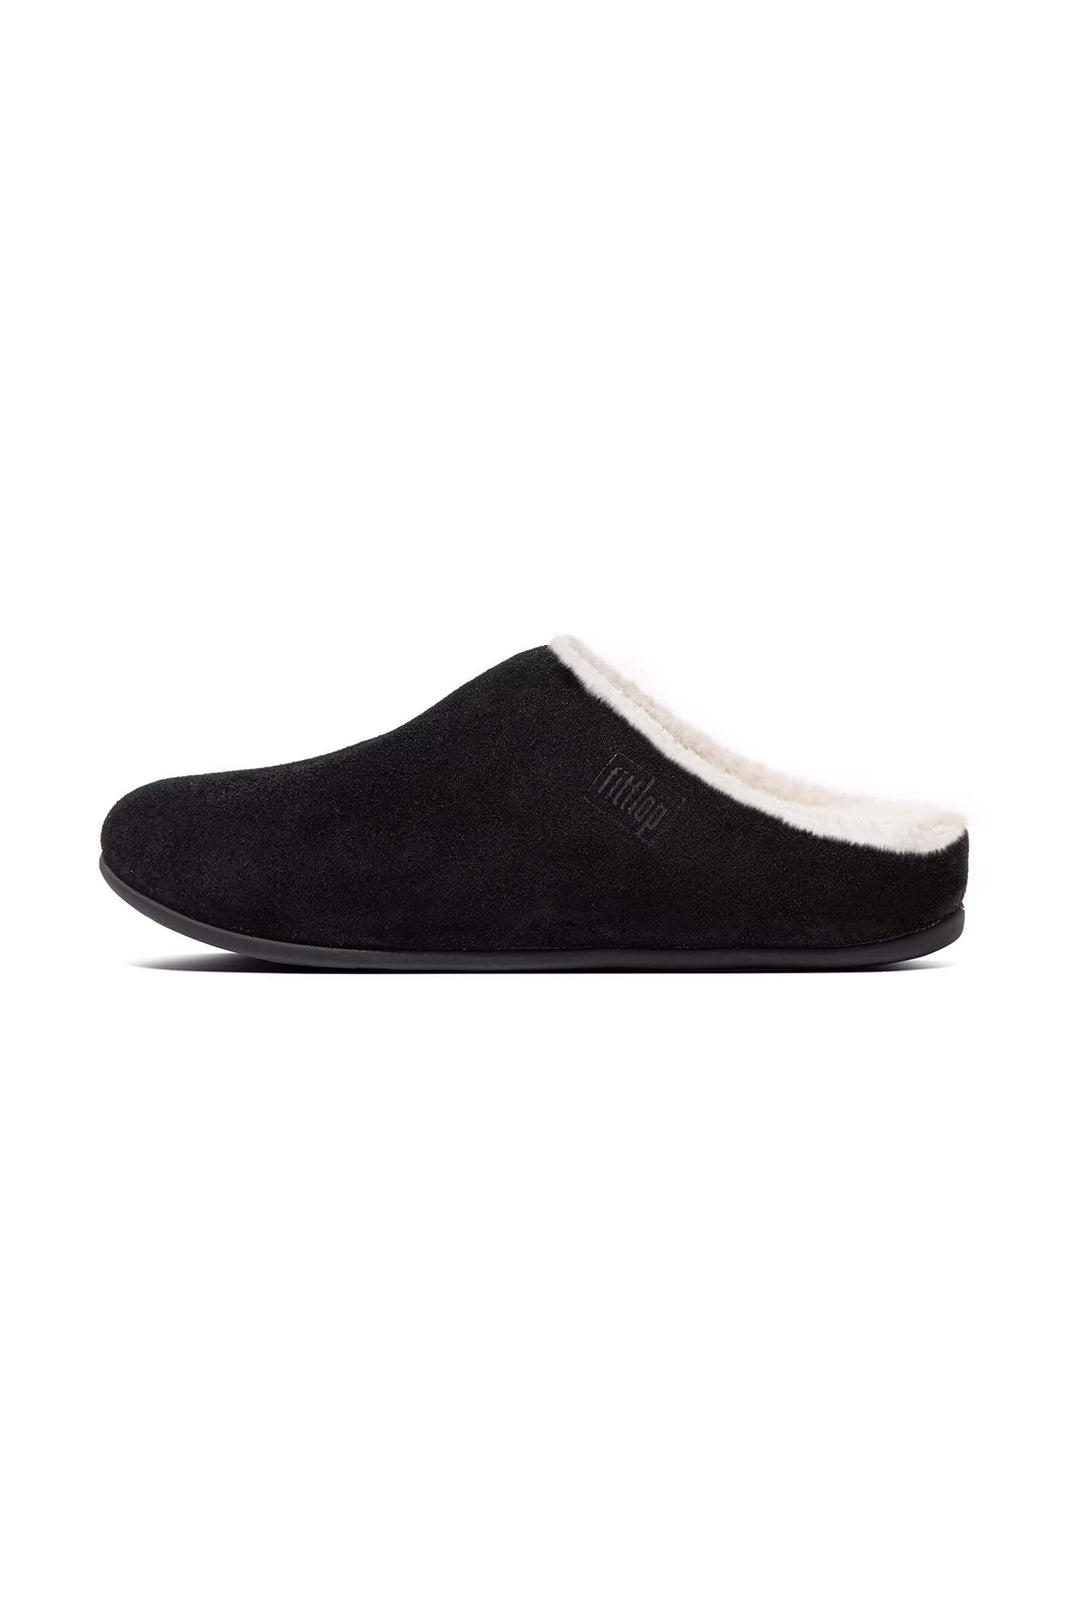 Fitflop N28-001 Chrissie Shearling Black Slipper - Shirley Allum Boutique